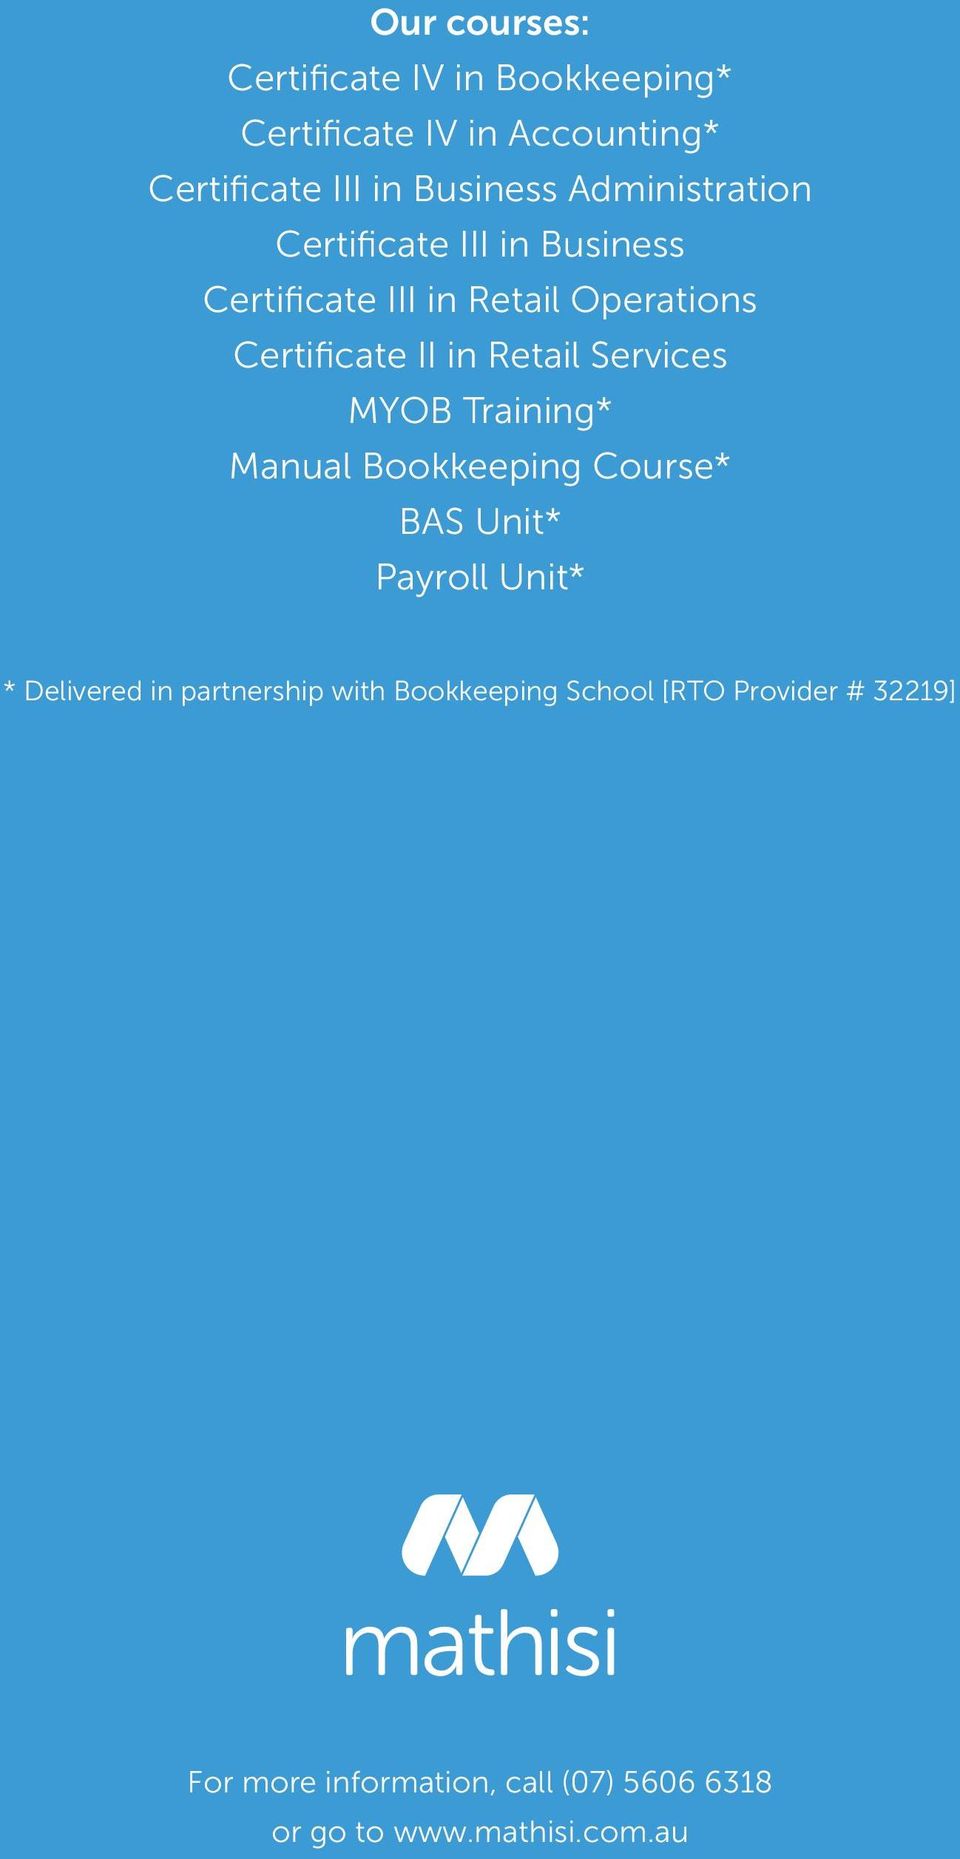 Services MYOB Training* Manual Bookkeeping Course* BAS Unit* Payroll Unit* * Delivered in partnership with